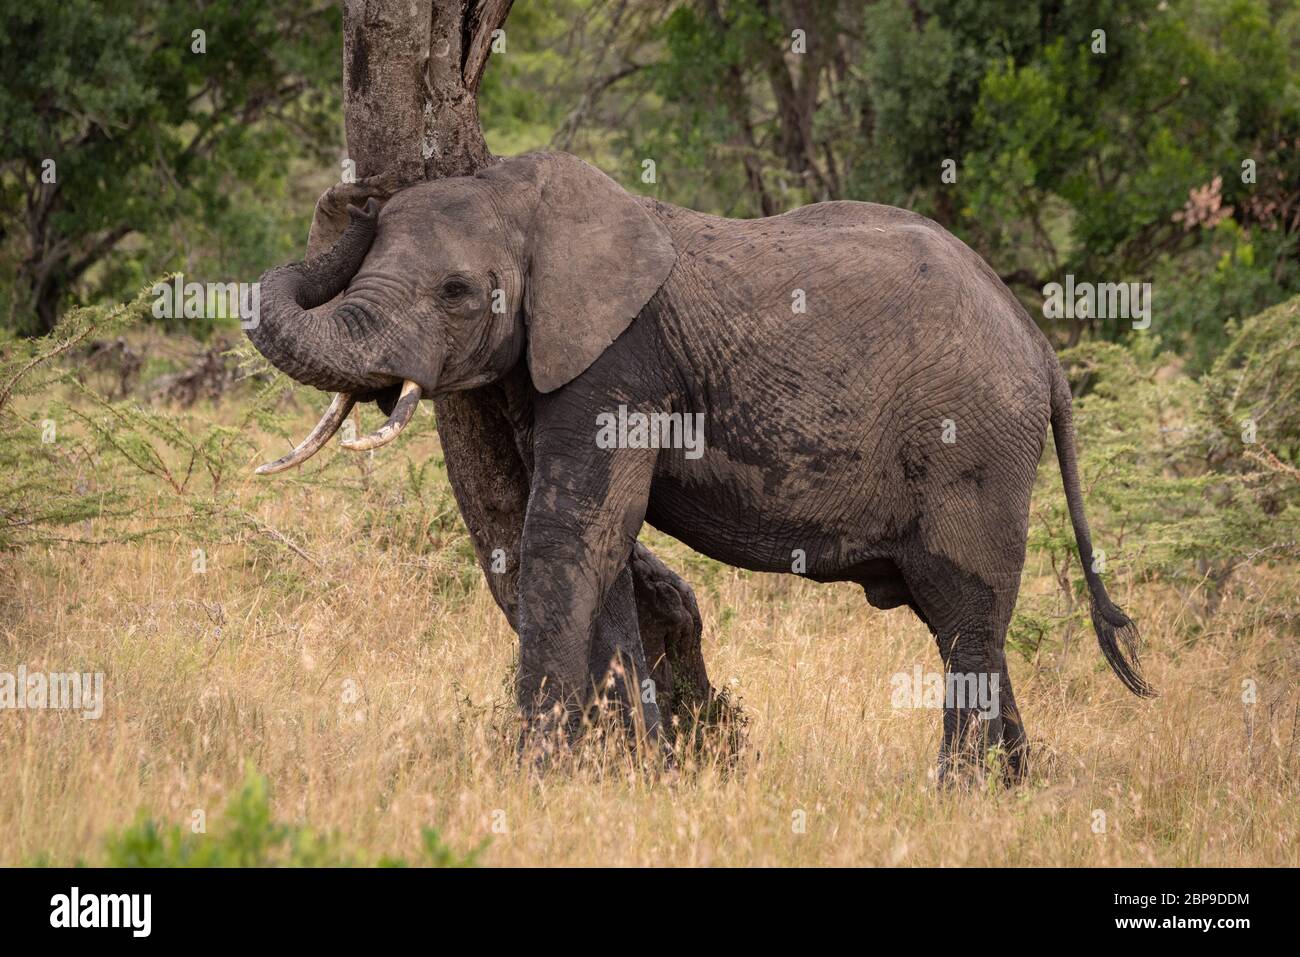 African elephant rubbing itself against twisted tree Stock Photo